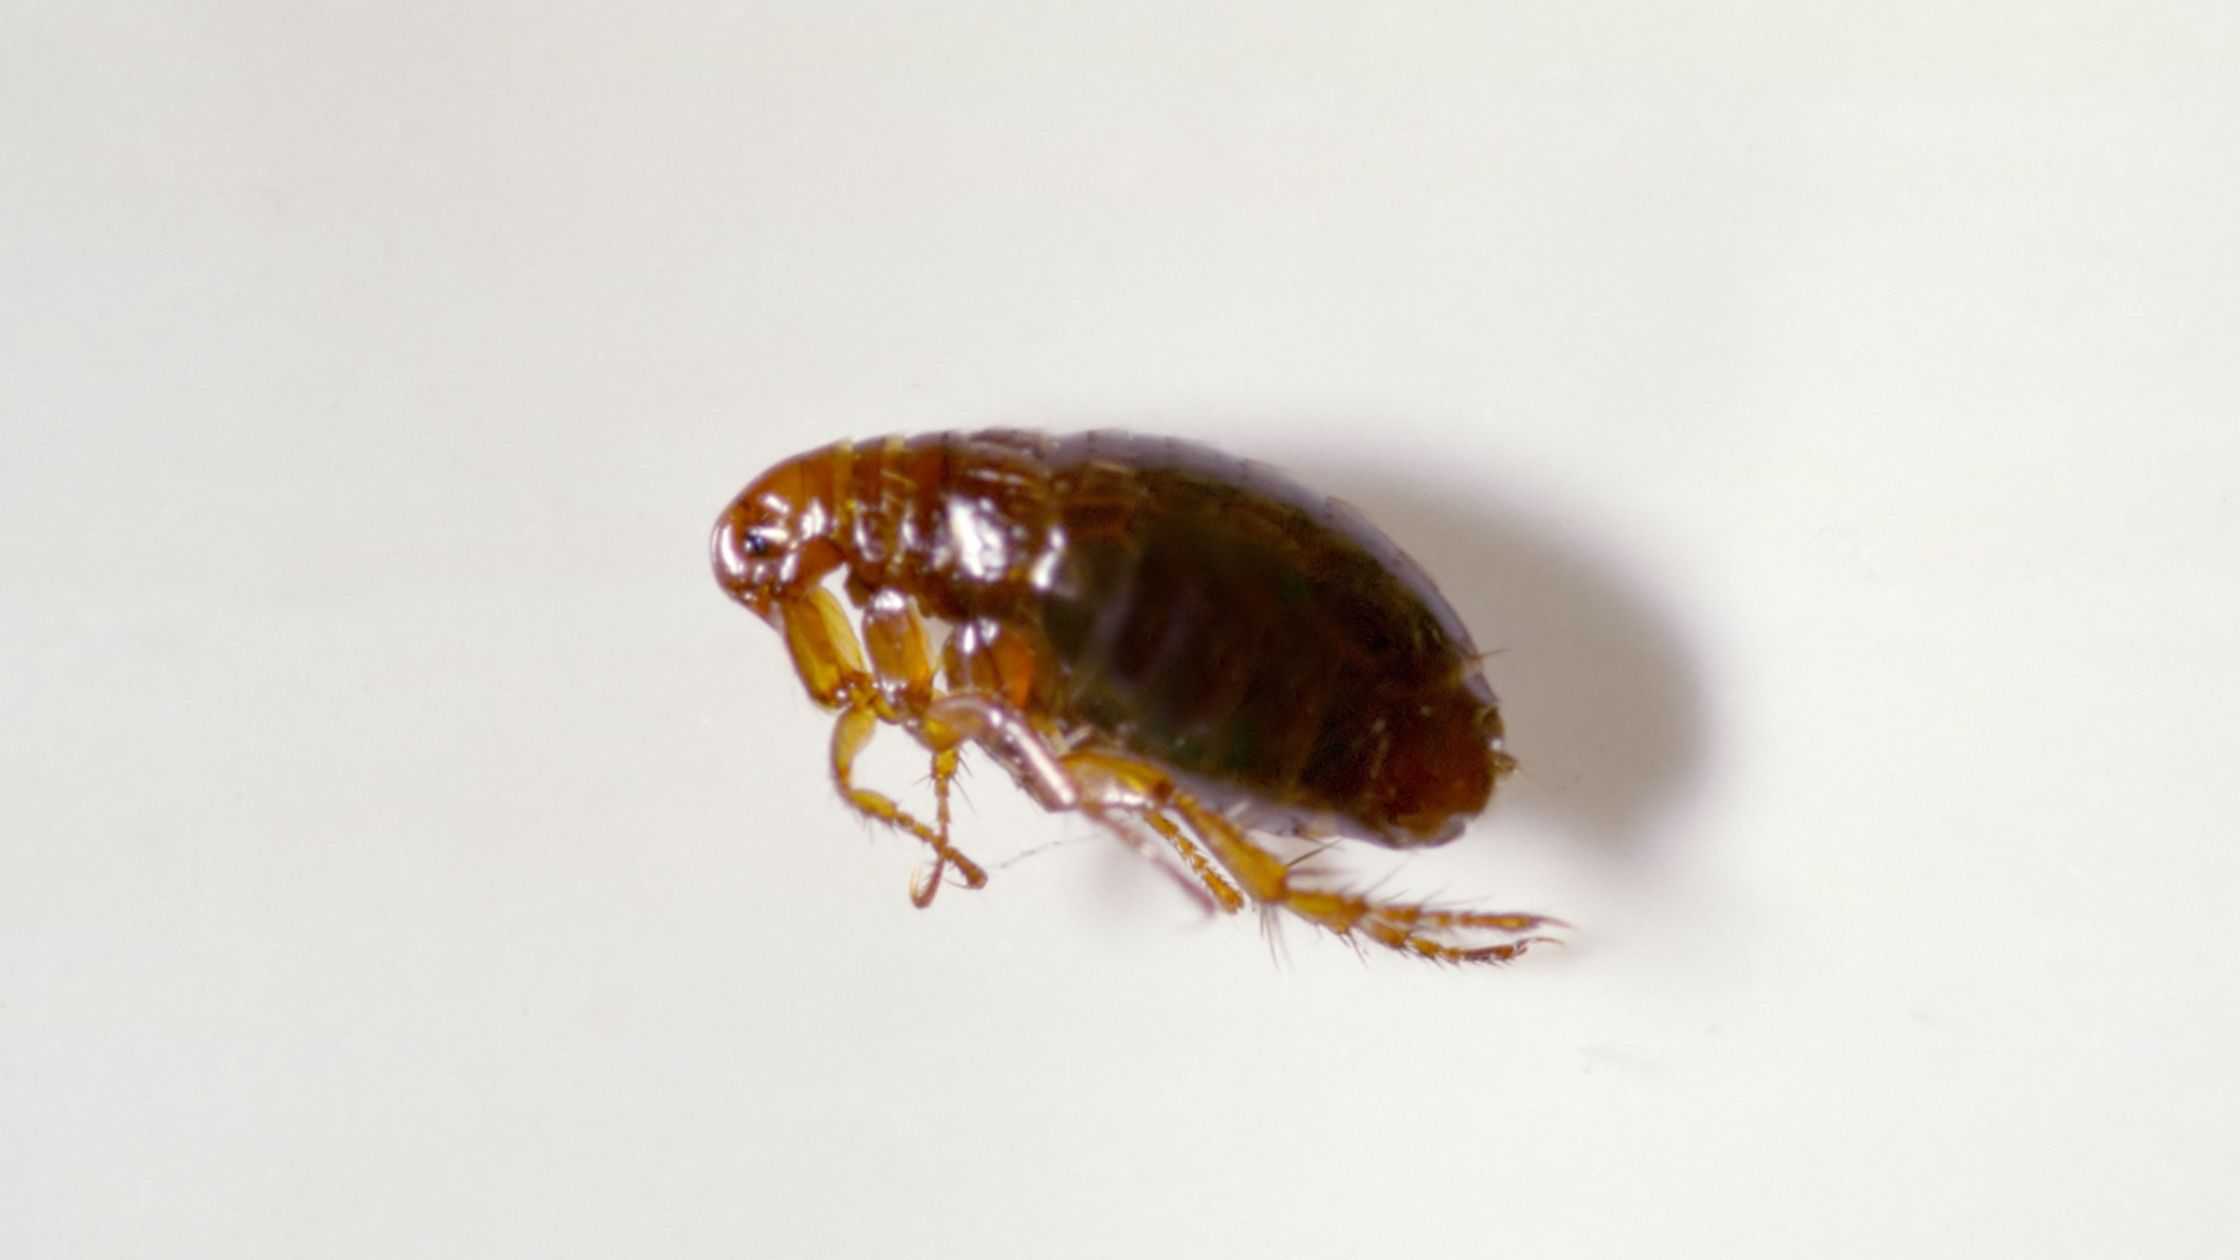 Fleas are common parasites that can irritate pets.